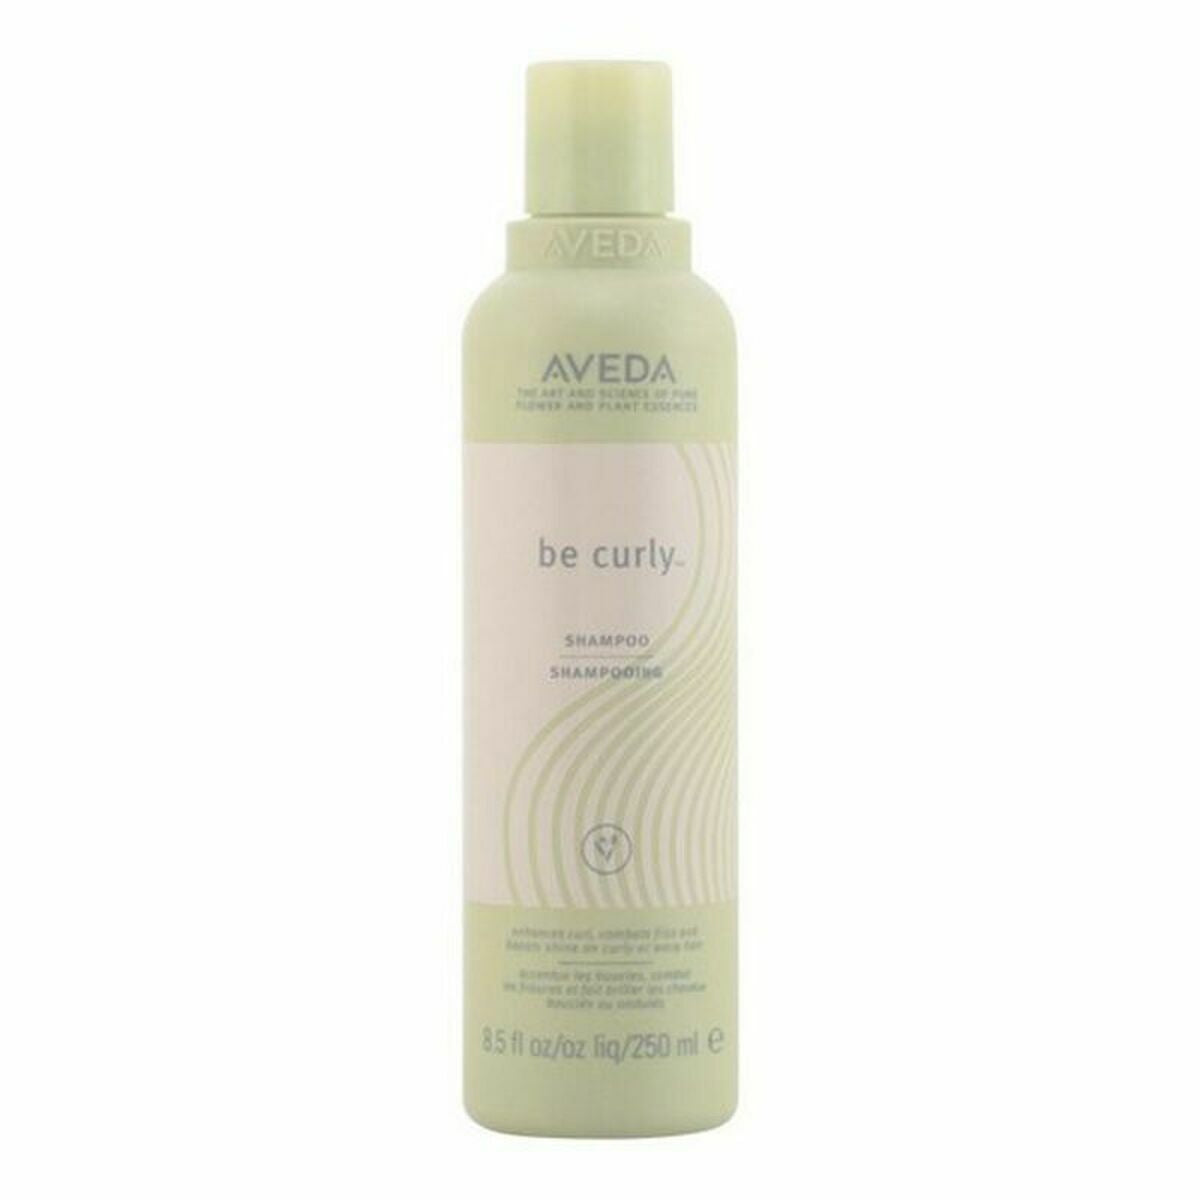 Shampoo for Curly Hair Be Curl Aveda Be Curly (250 ml)